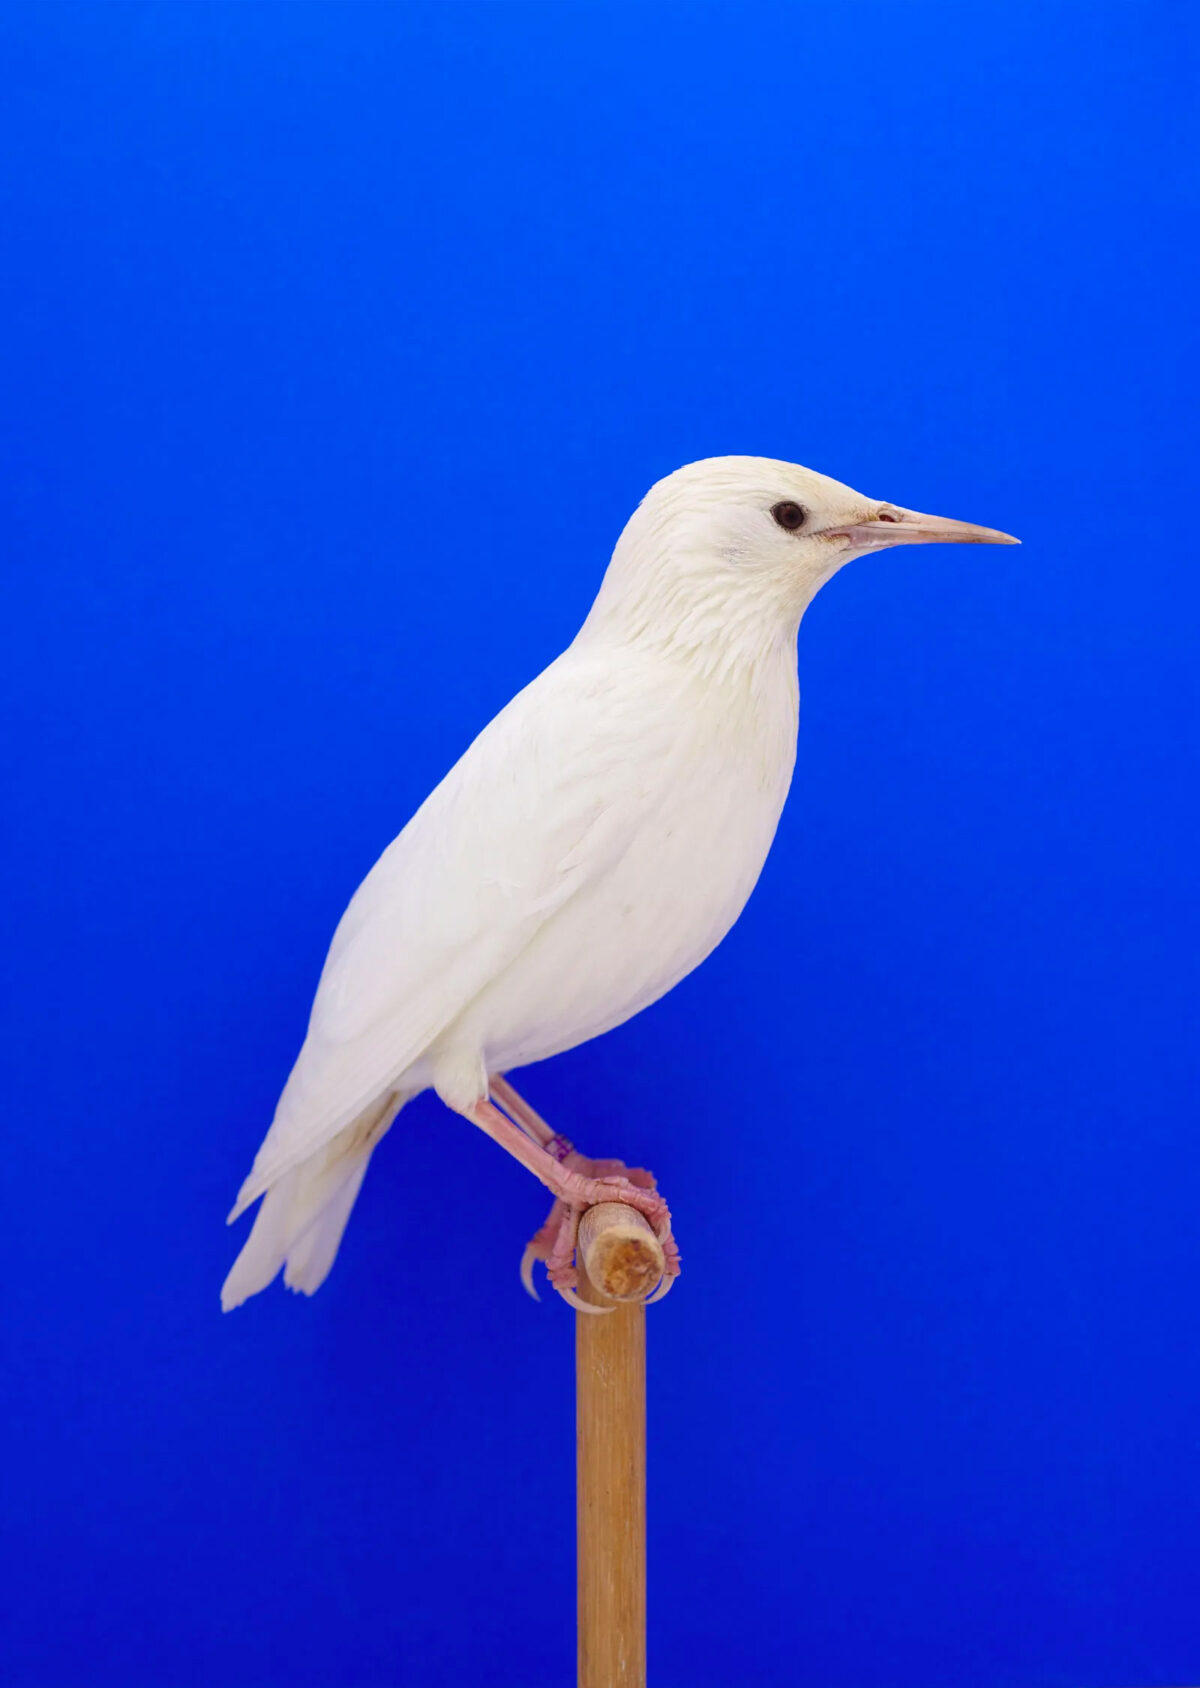 An Incomplete Dictionary Of Show Birds A Minimalist Bird Photography Series By Luke Stephenson (8)